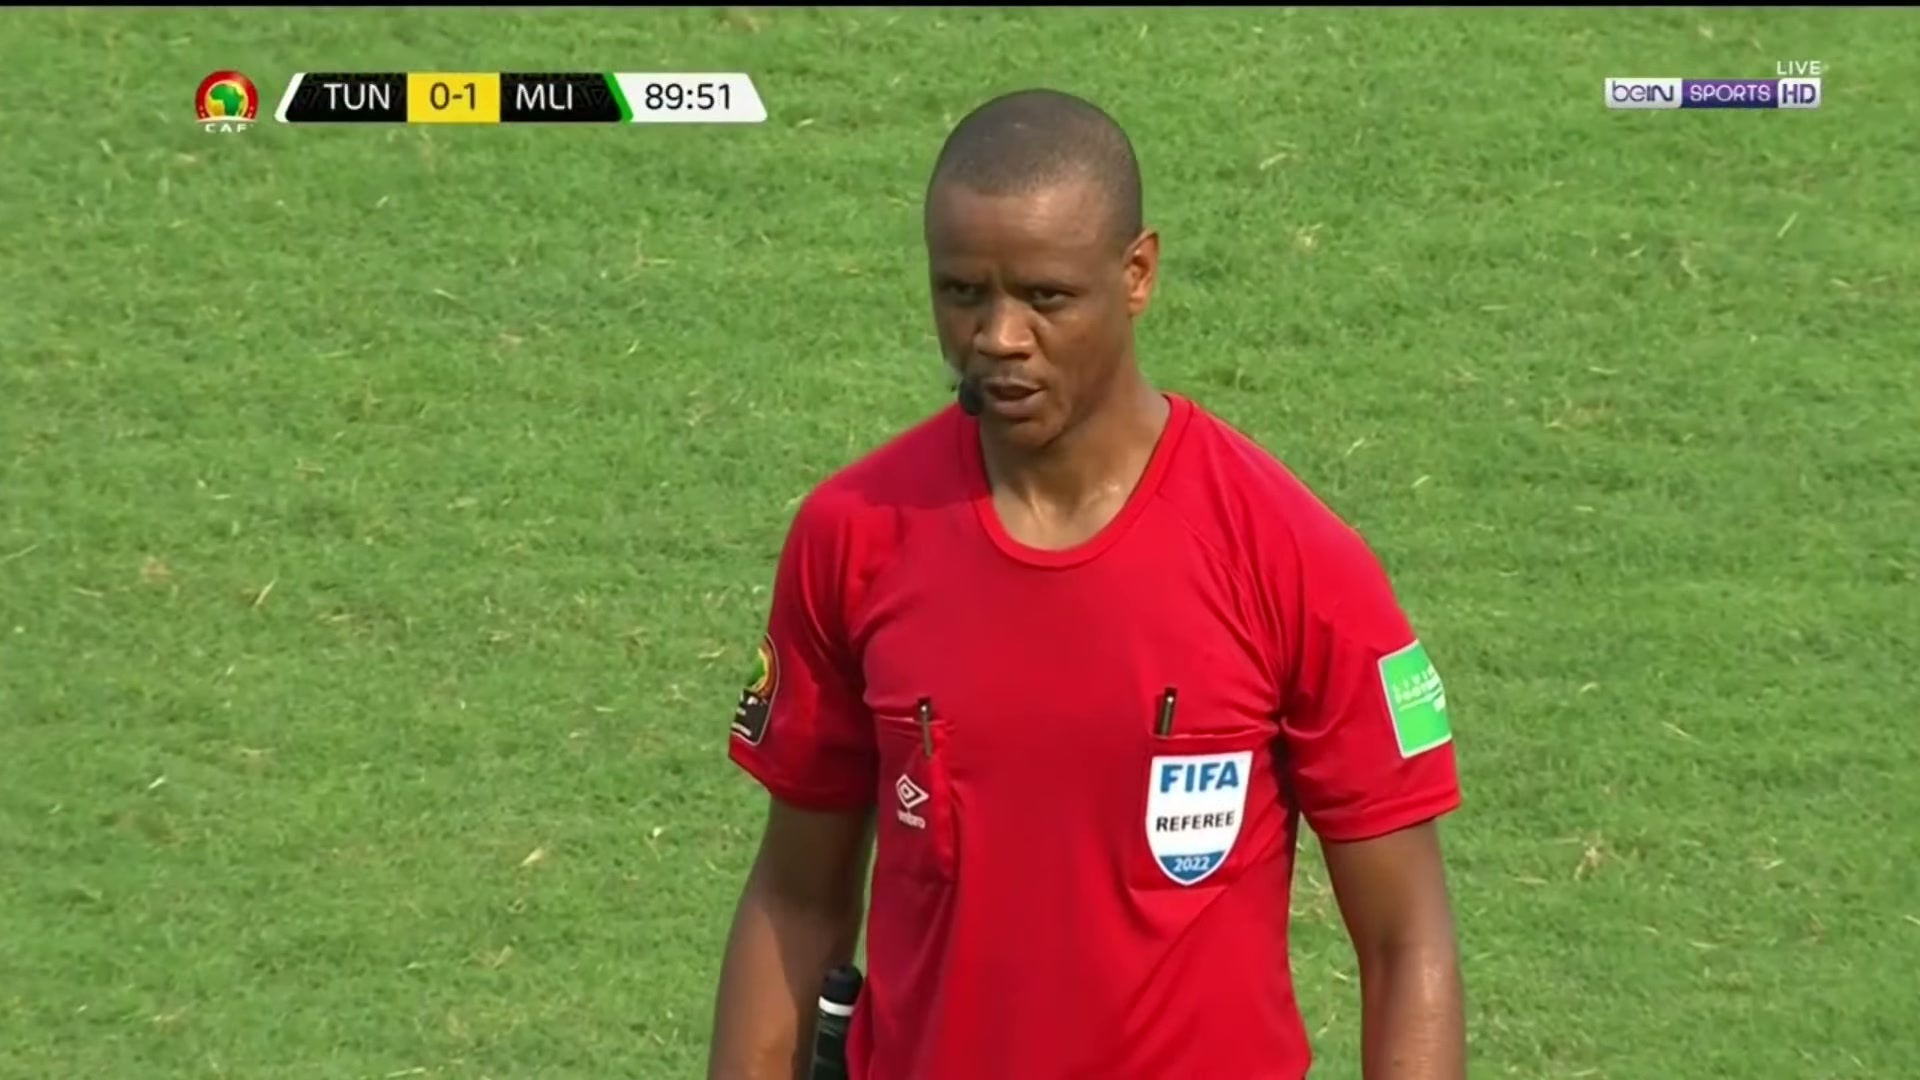 AFCON ref blows full time early